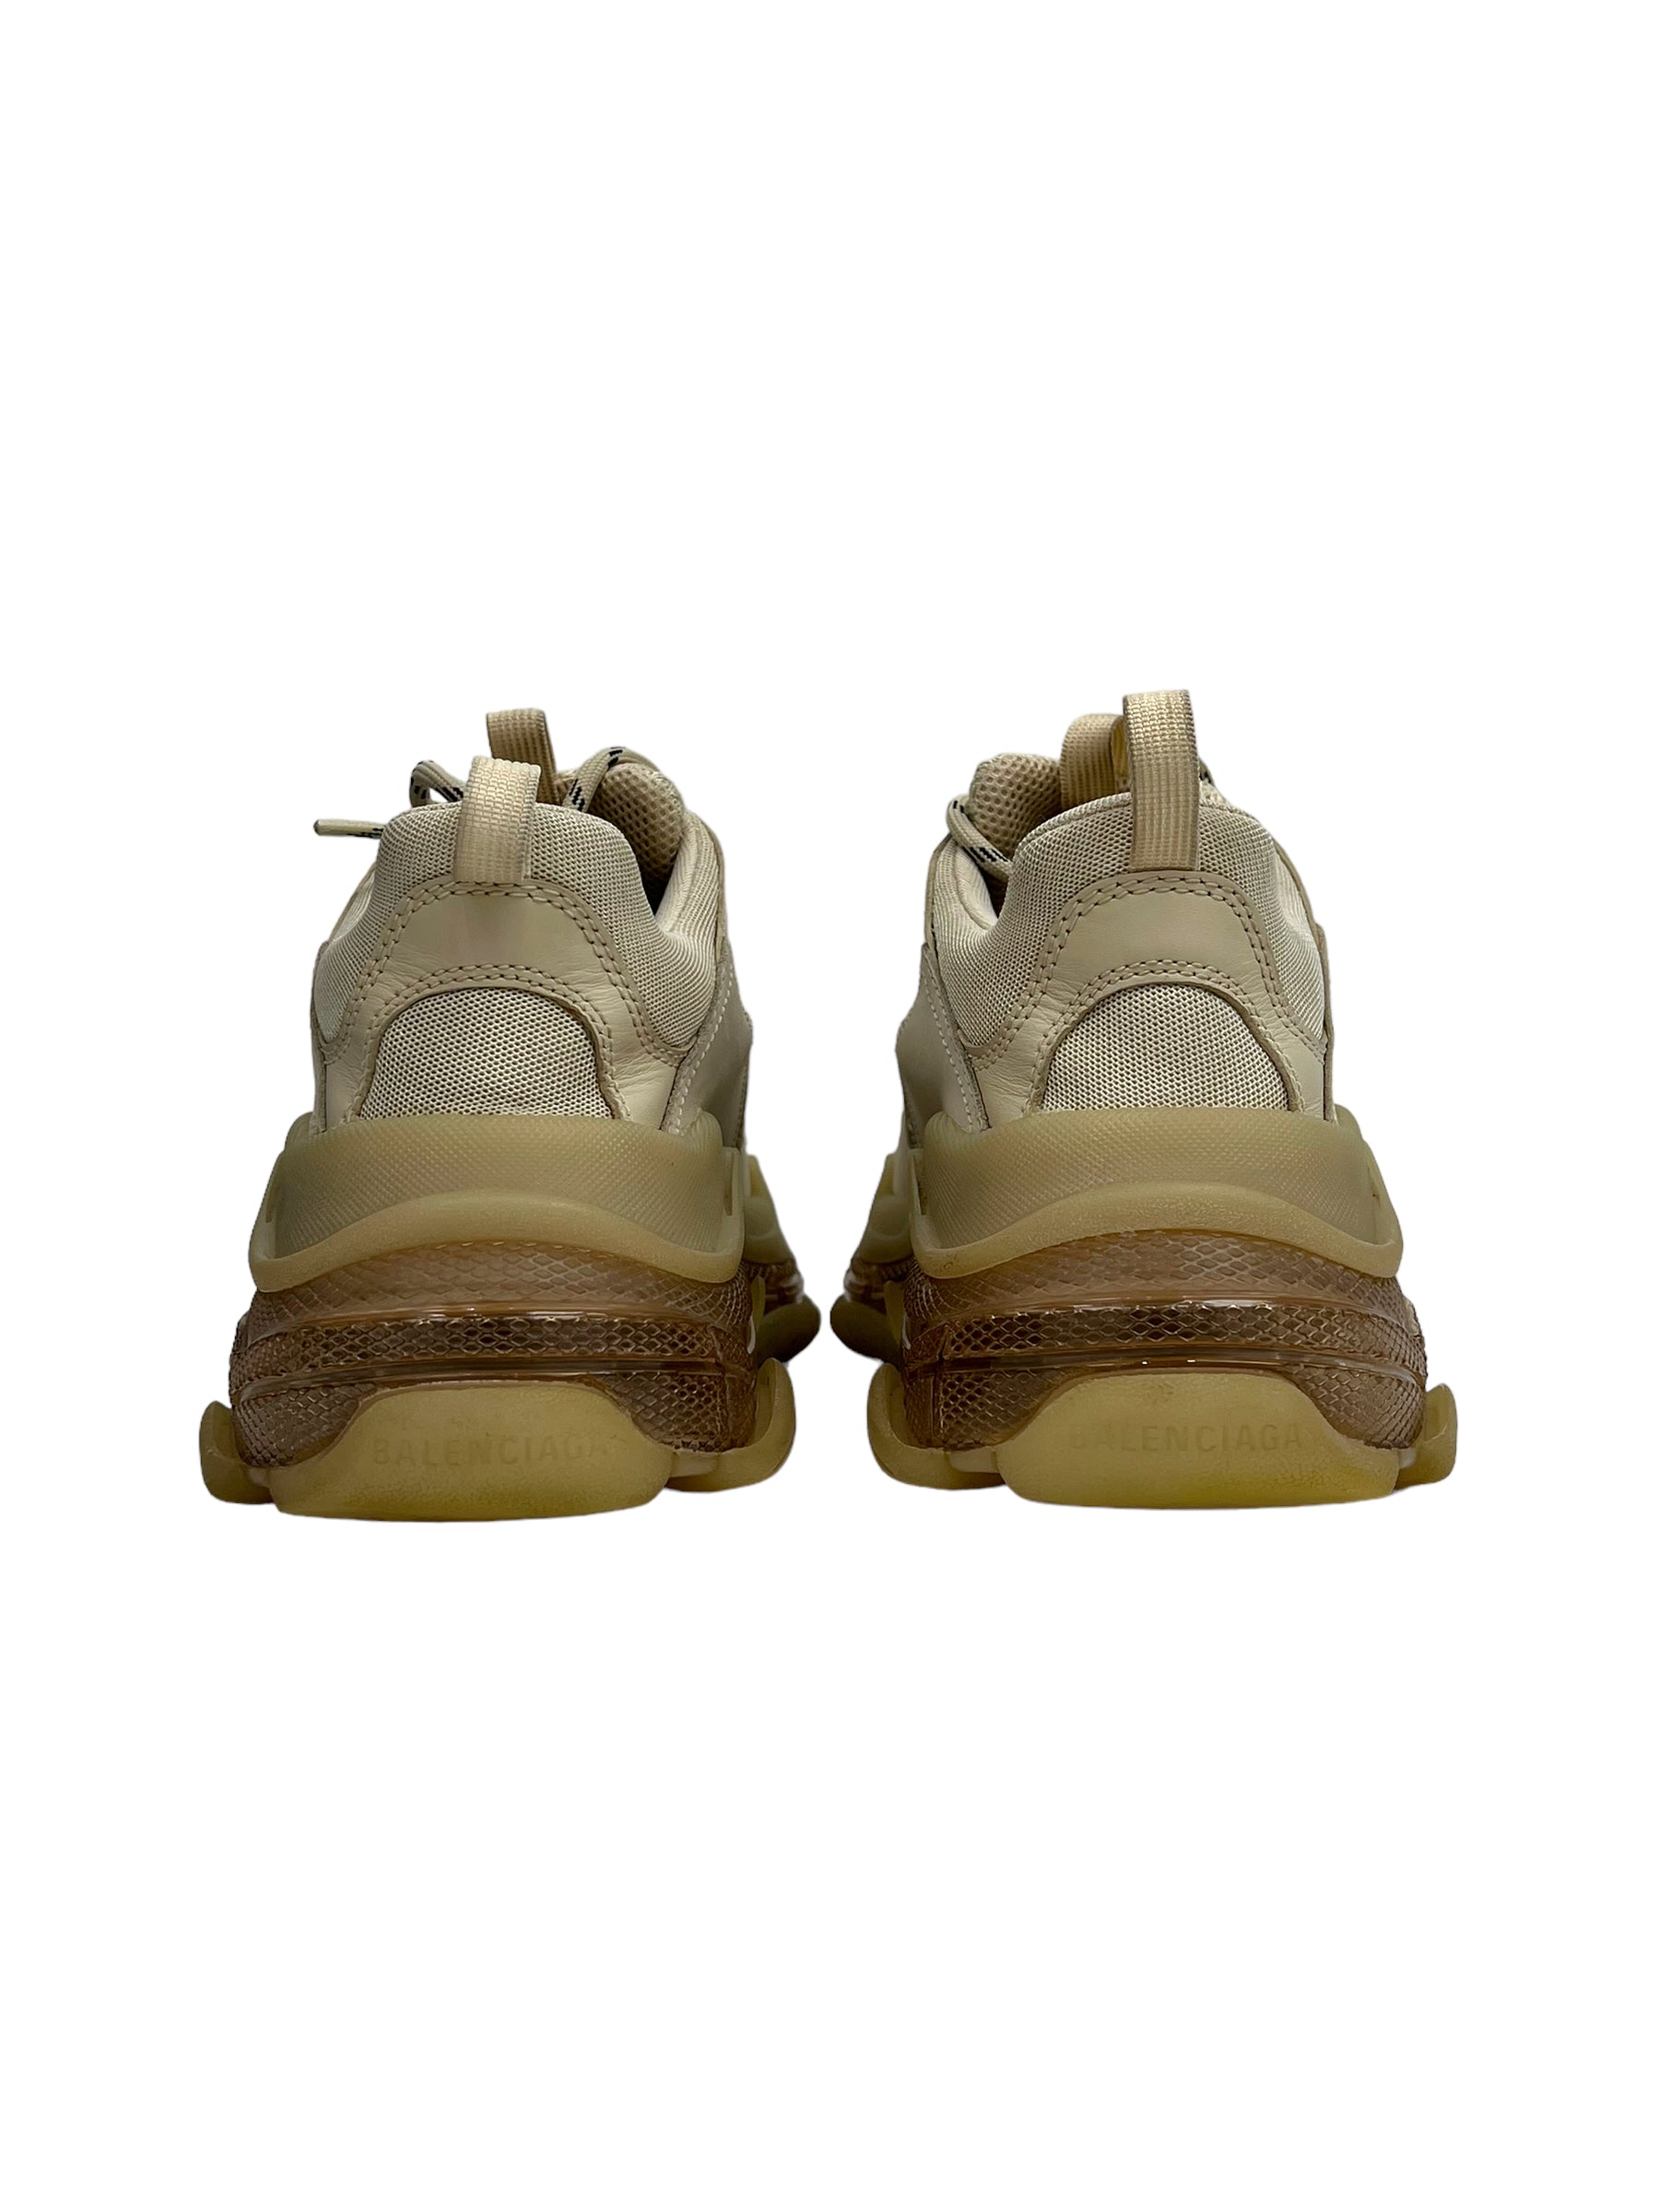 Balenciaga Triple S Trainers Off White Clear Sole- Genuine Design Luxury Consignment for Men. New & Pre-Owned Clothing, Shoes, & Accessories. Calgary, Canada